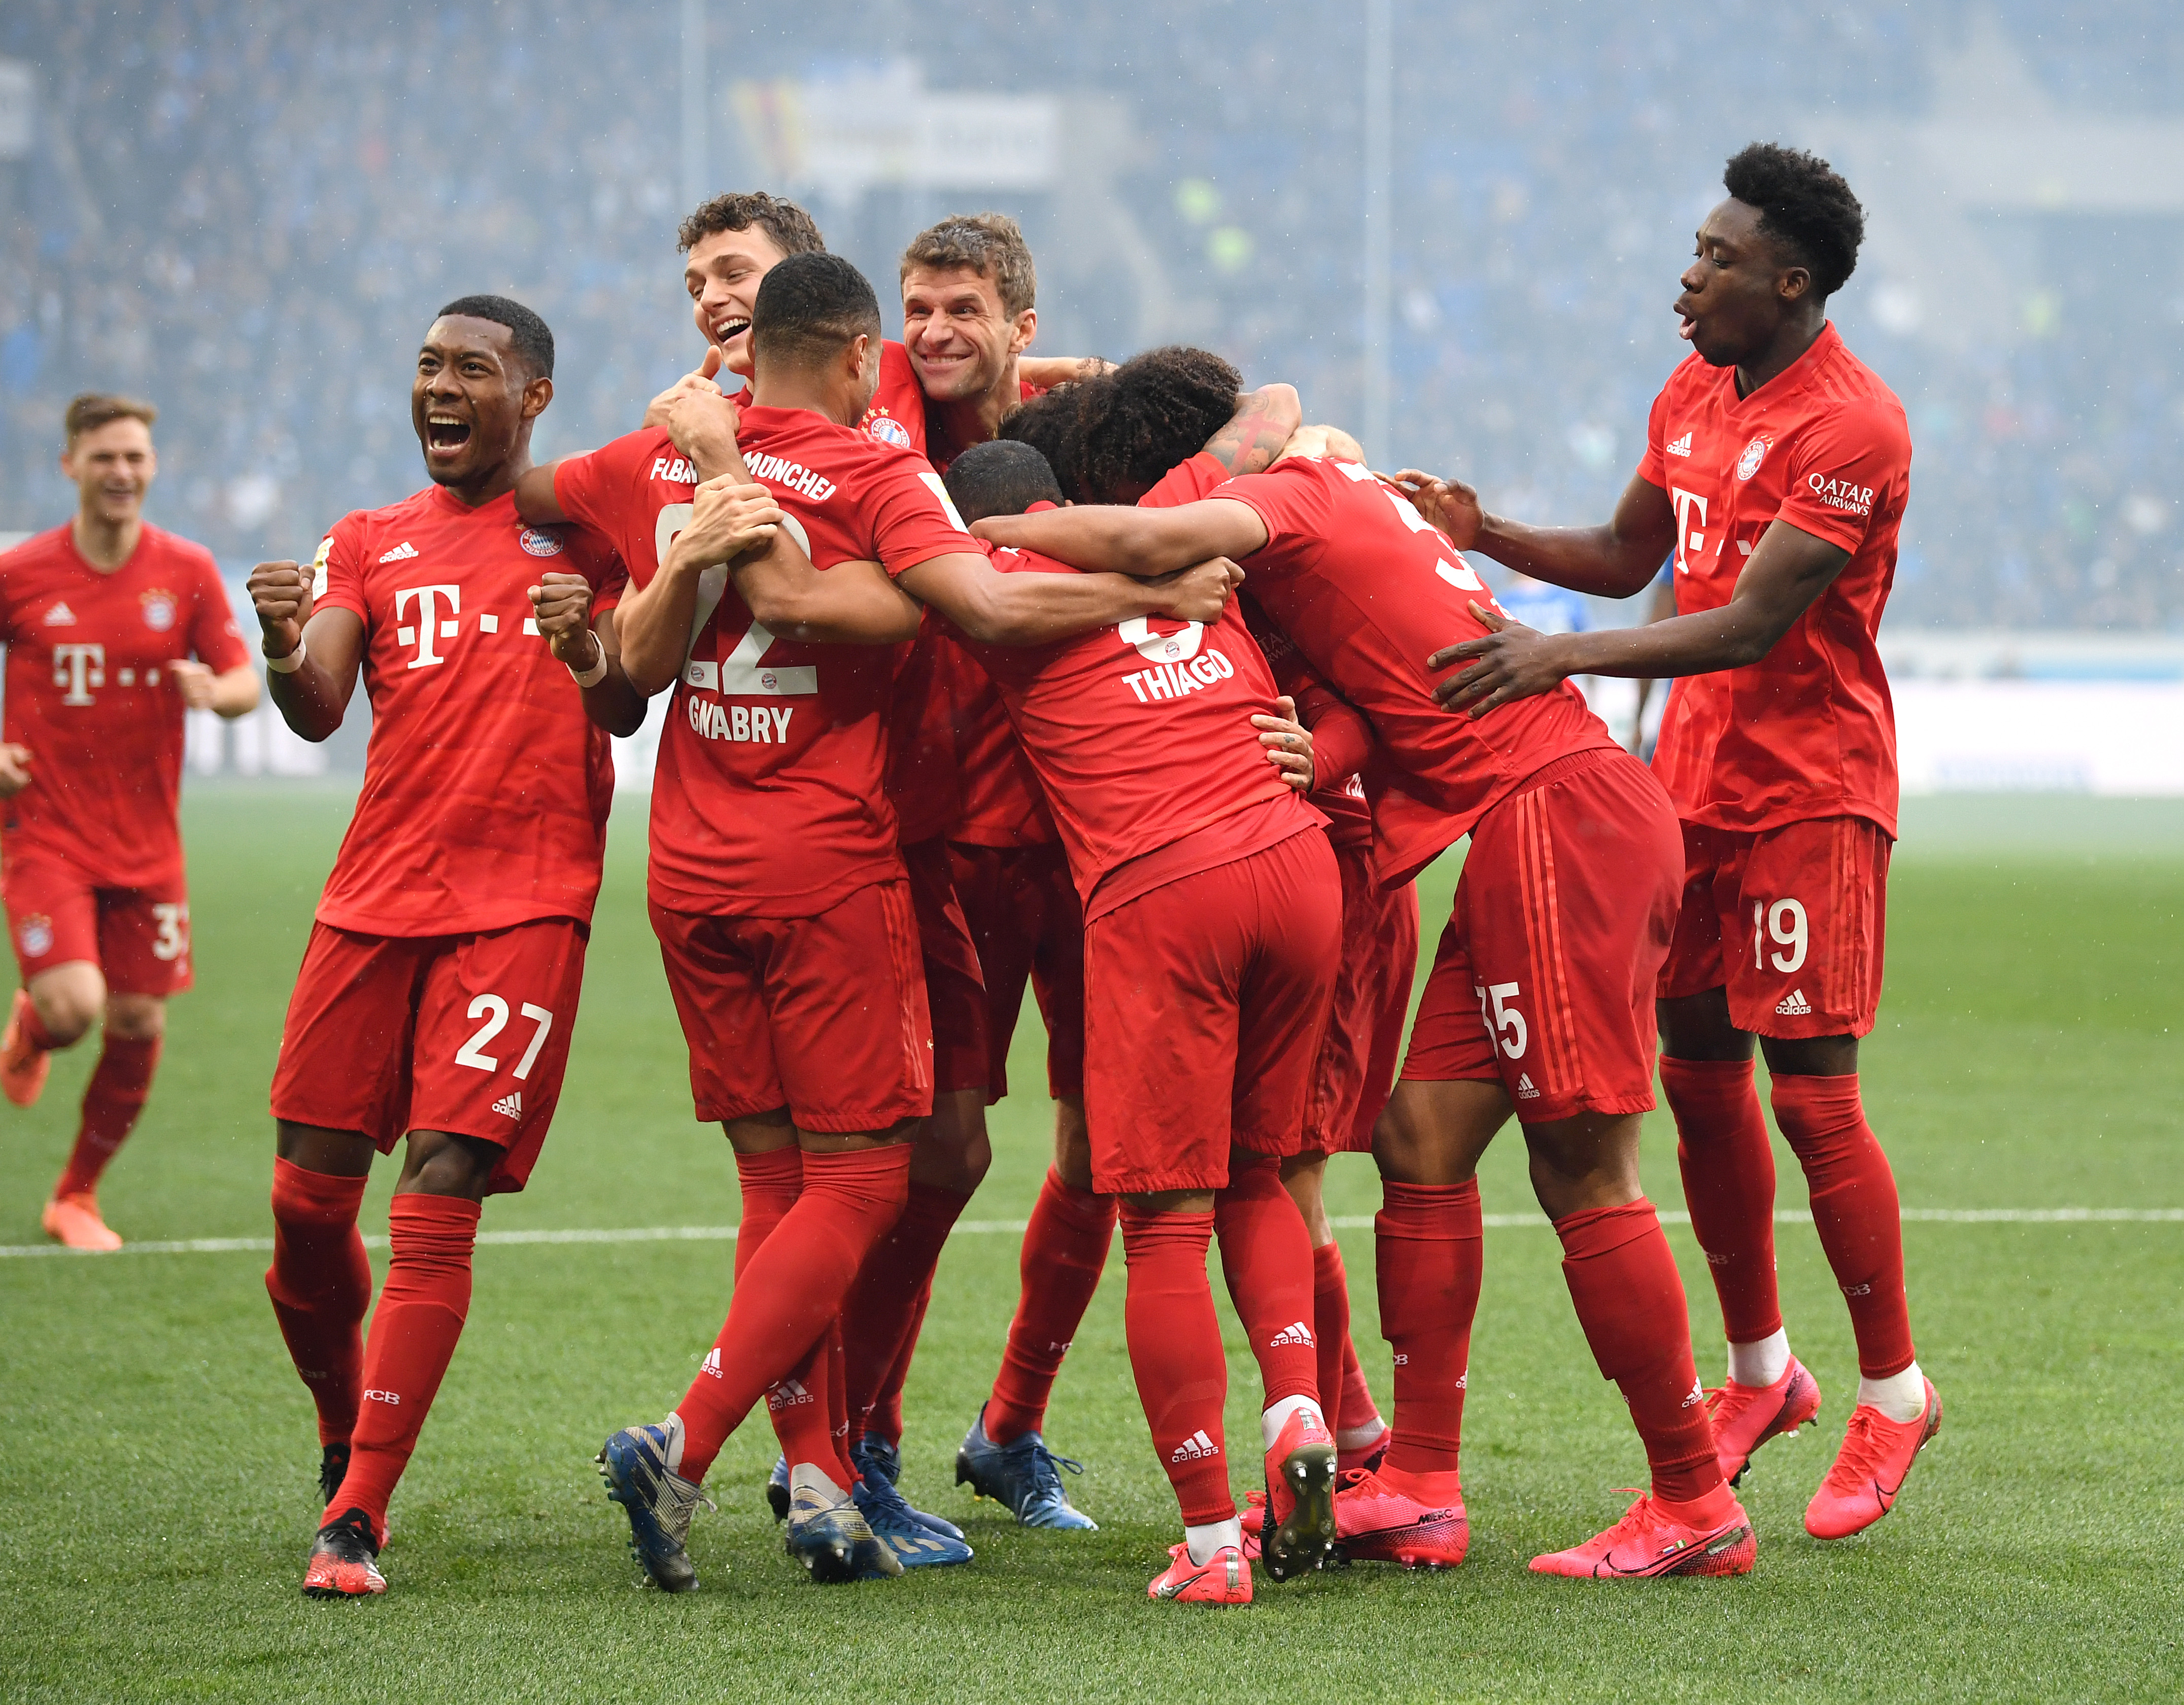 Bayern Munich march to another title in our simulation.